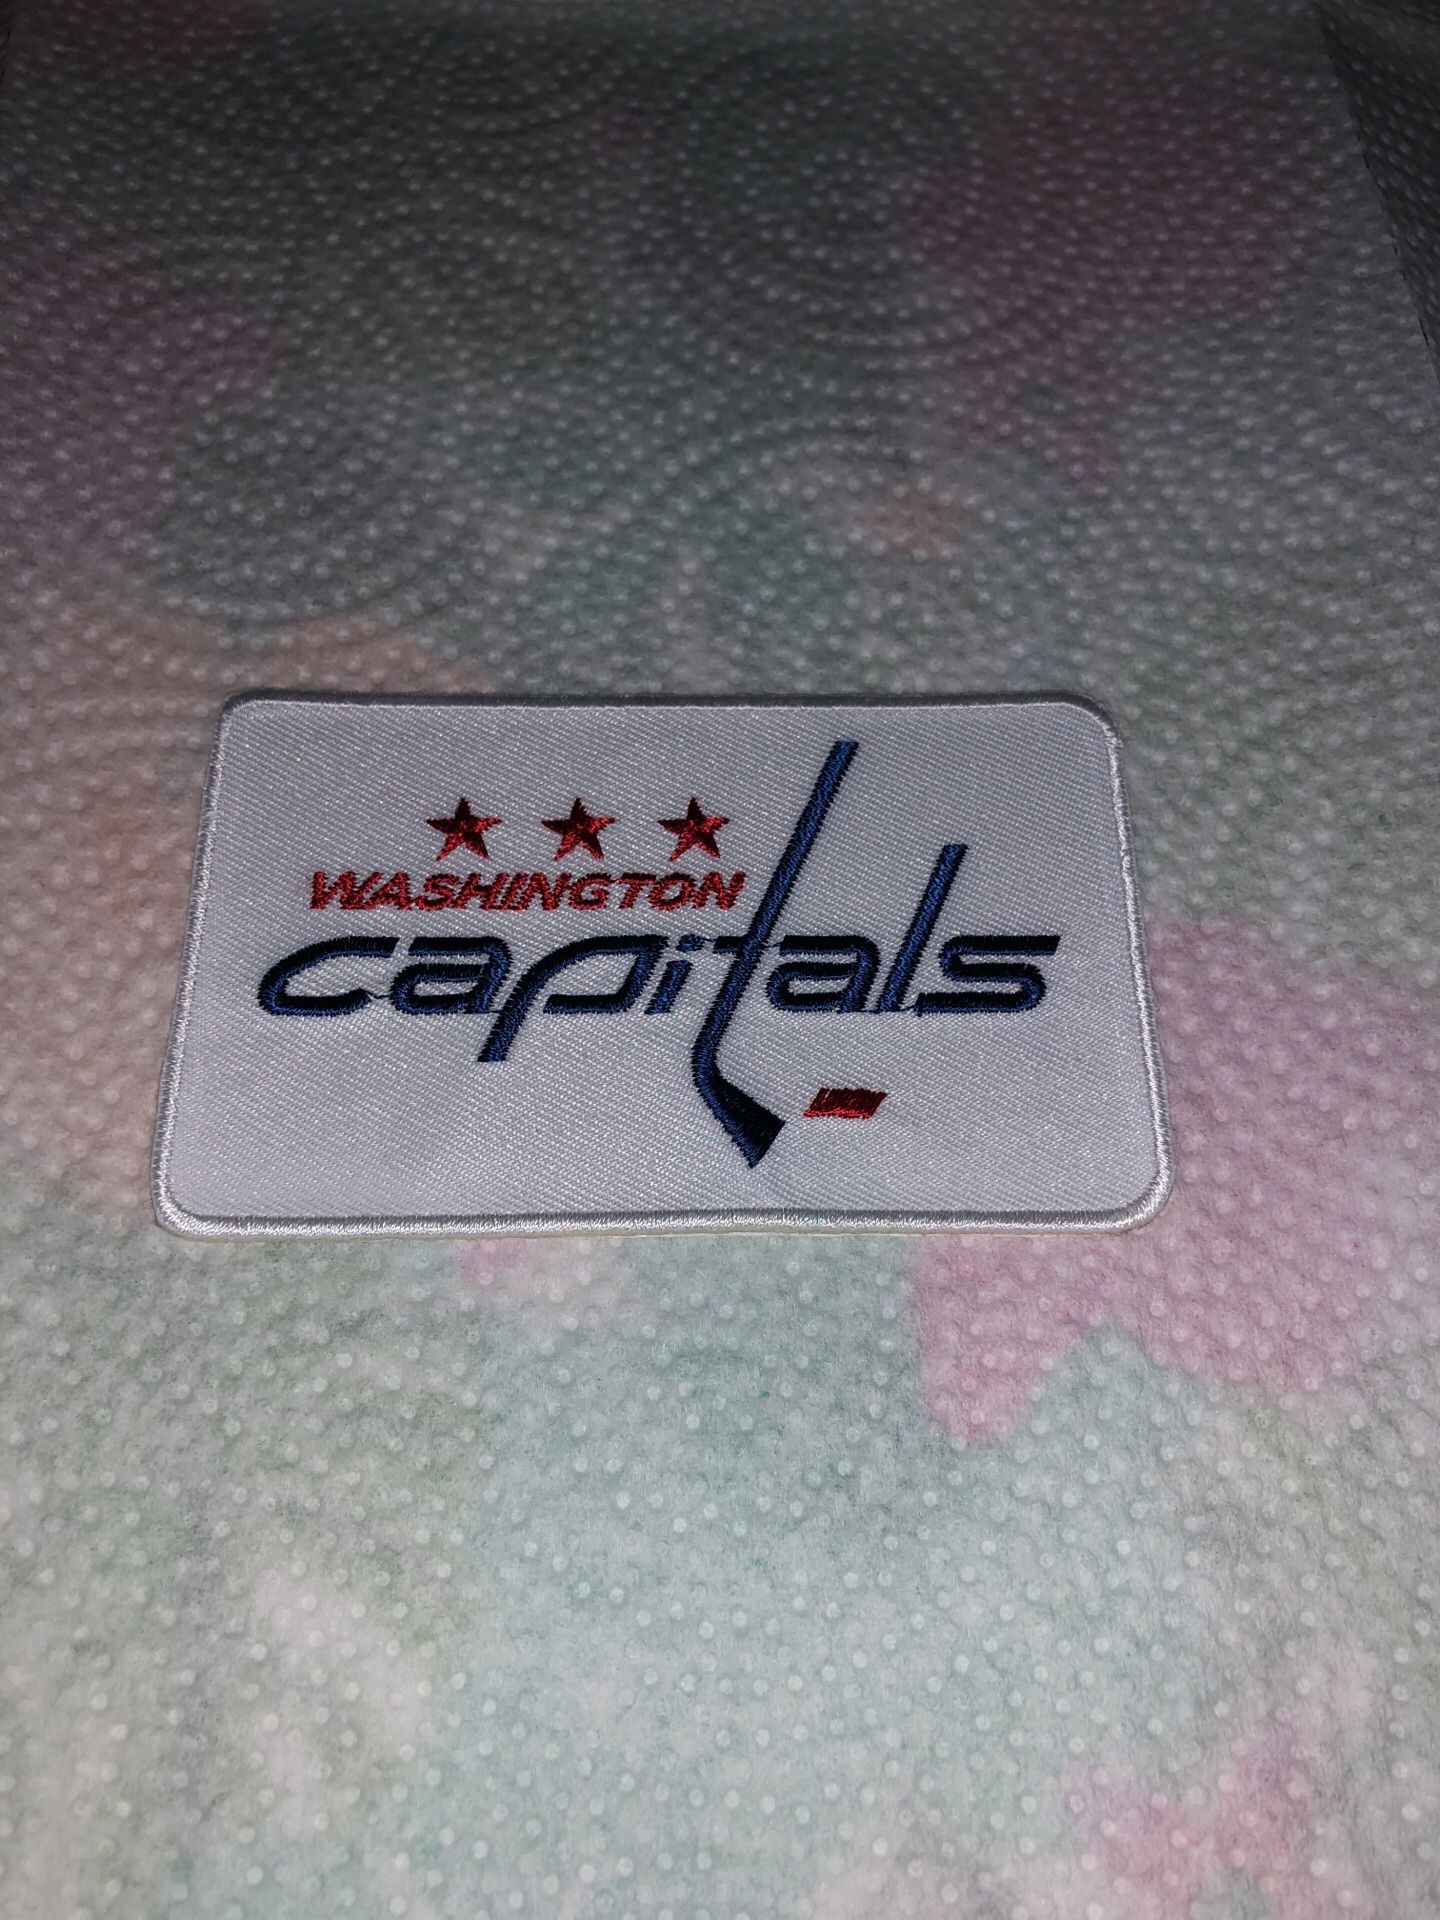 Washington Capitals Embroidered Team Logo Patch 1 3/4 inched High by 3” long